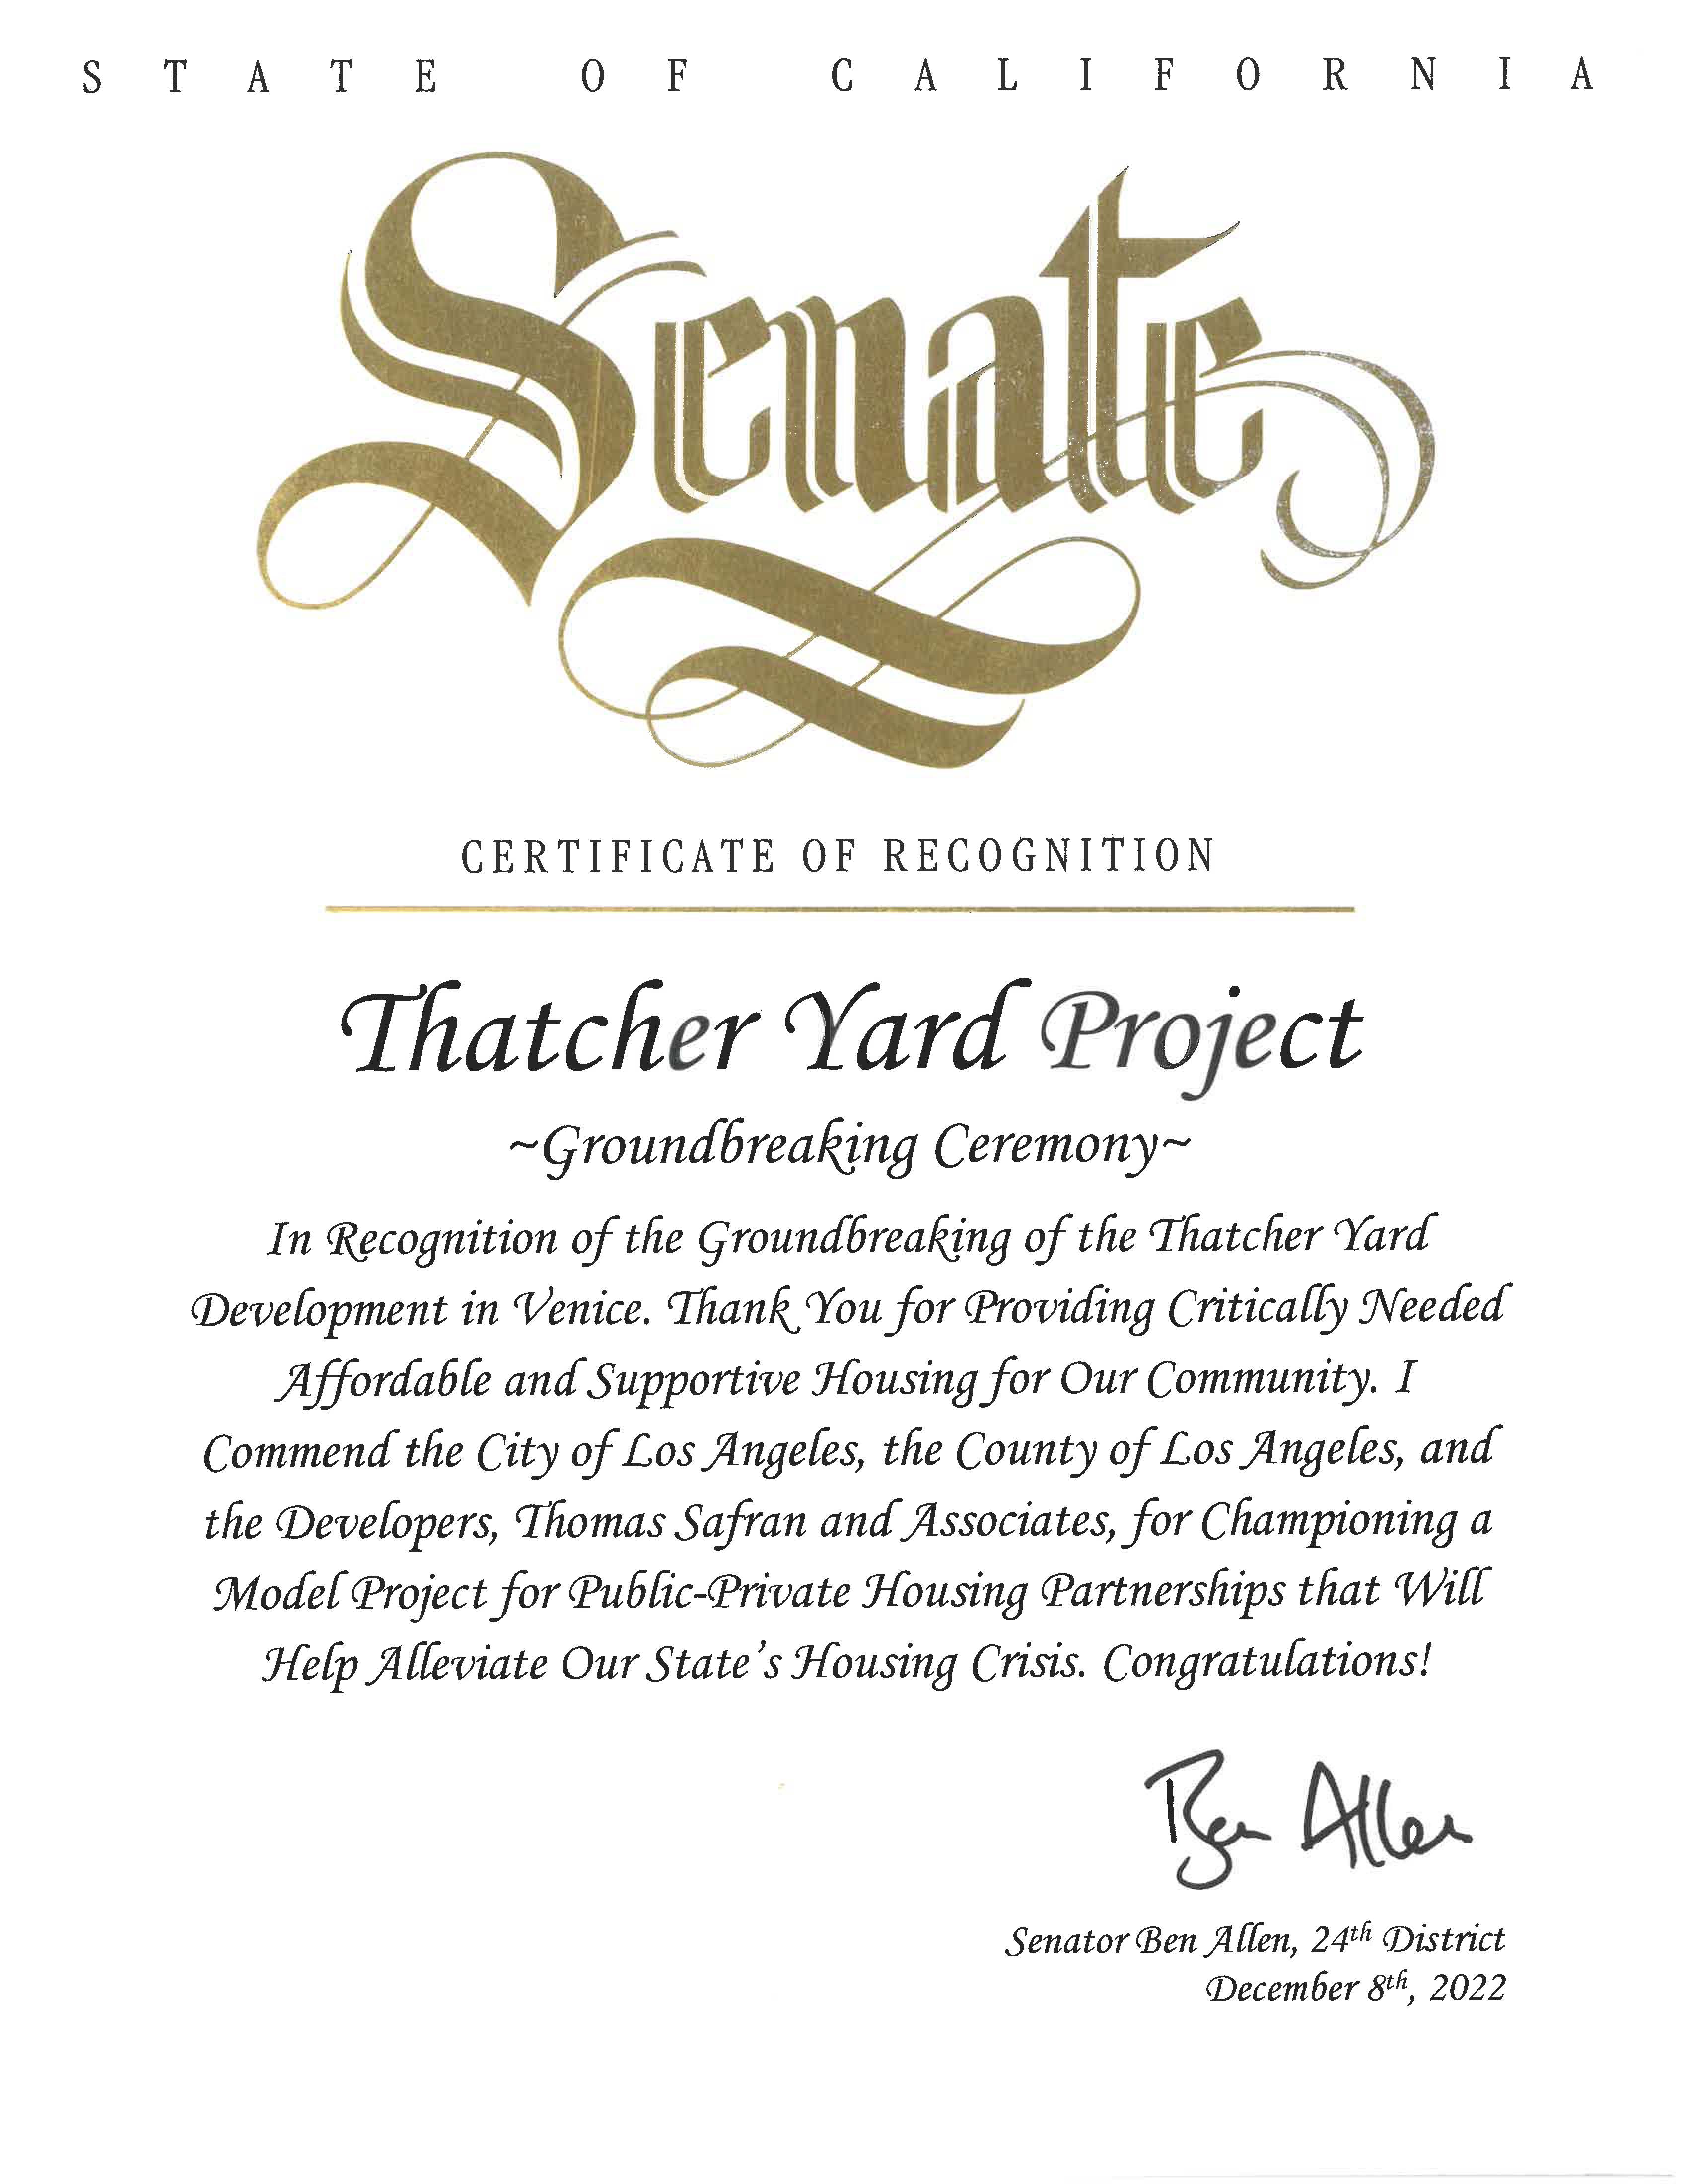 State of California Senate - Certificate of Recognition 2022 - 
Thatcher Yard